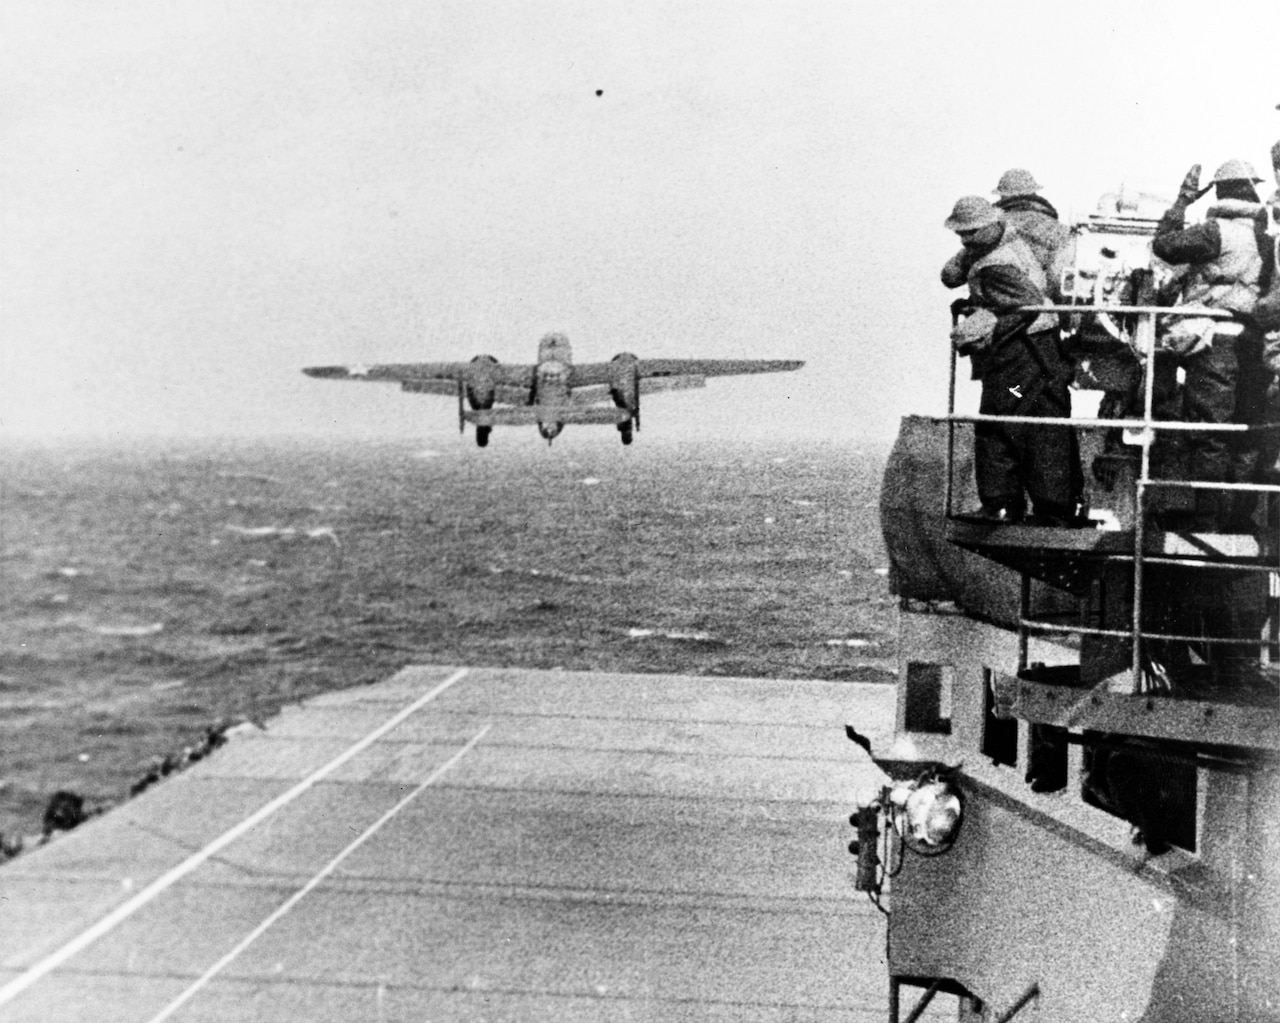 An aircraft takes off over the ocean from an aircraft carrier.